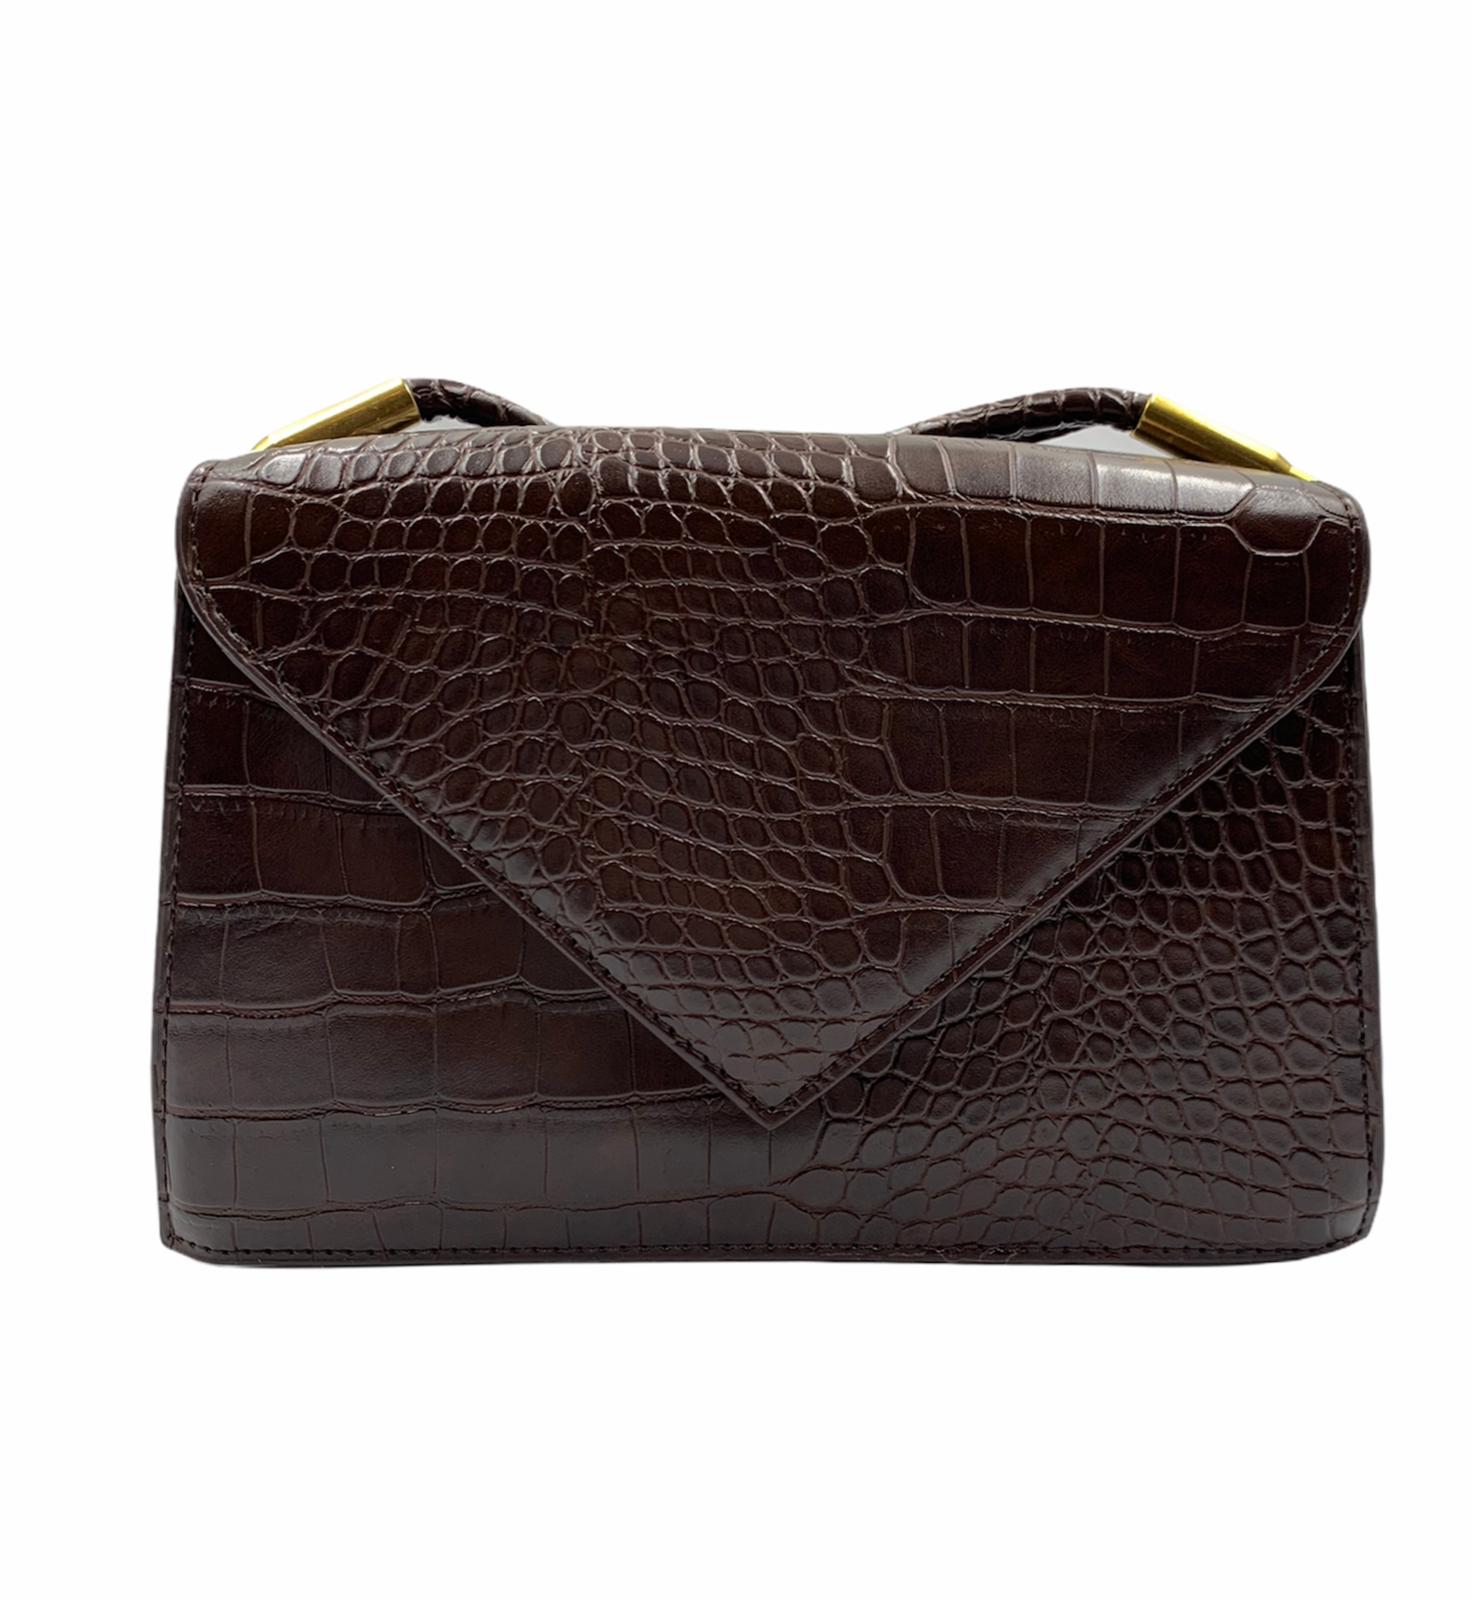 Brown Crocodile Leather Bag with Gold detail